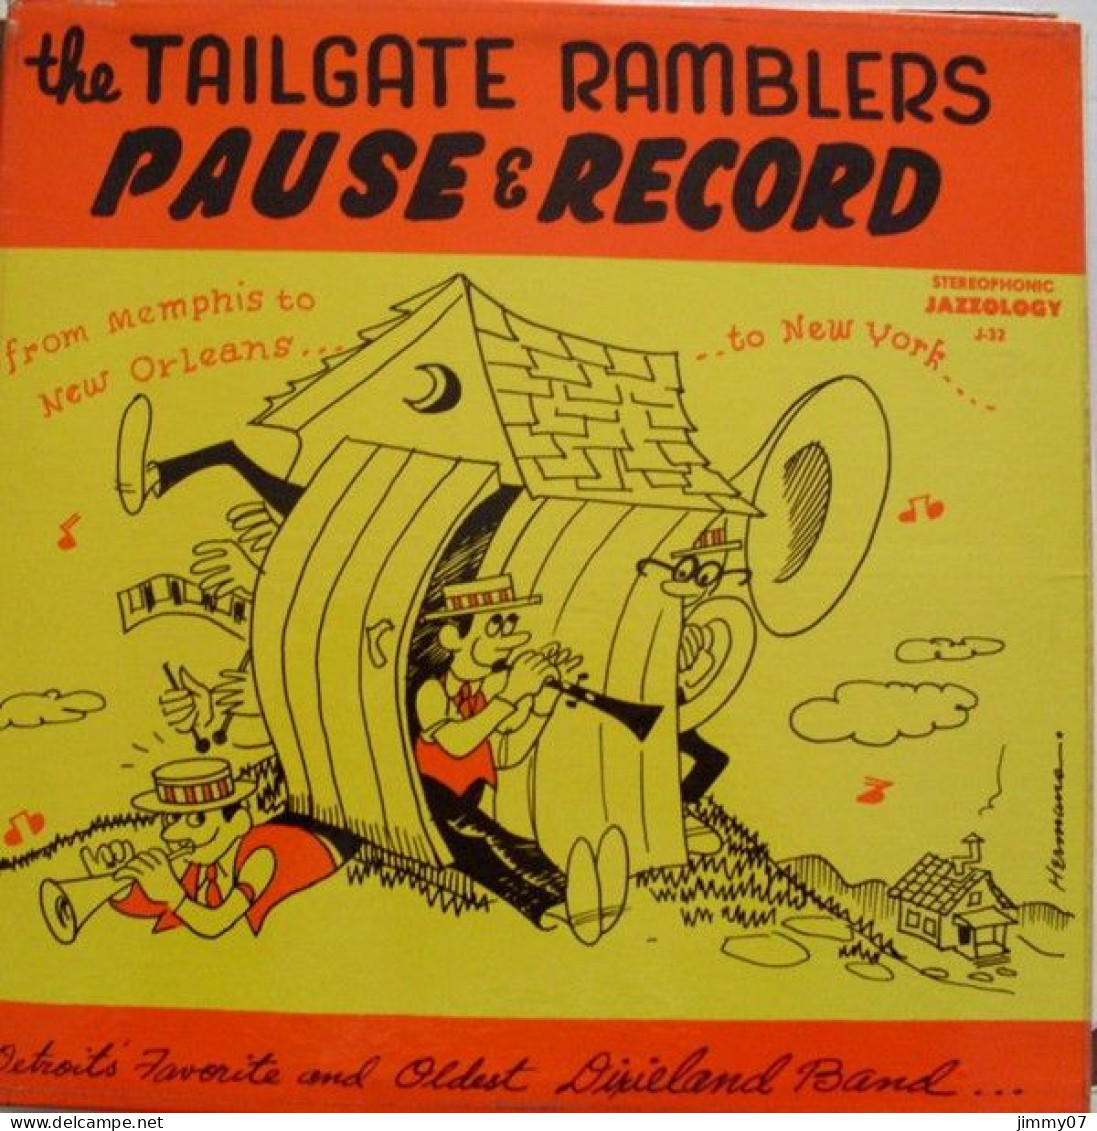 The Tailgate Ramblers - Pause And Record (LP, Album) - Jazz